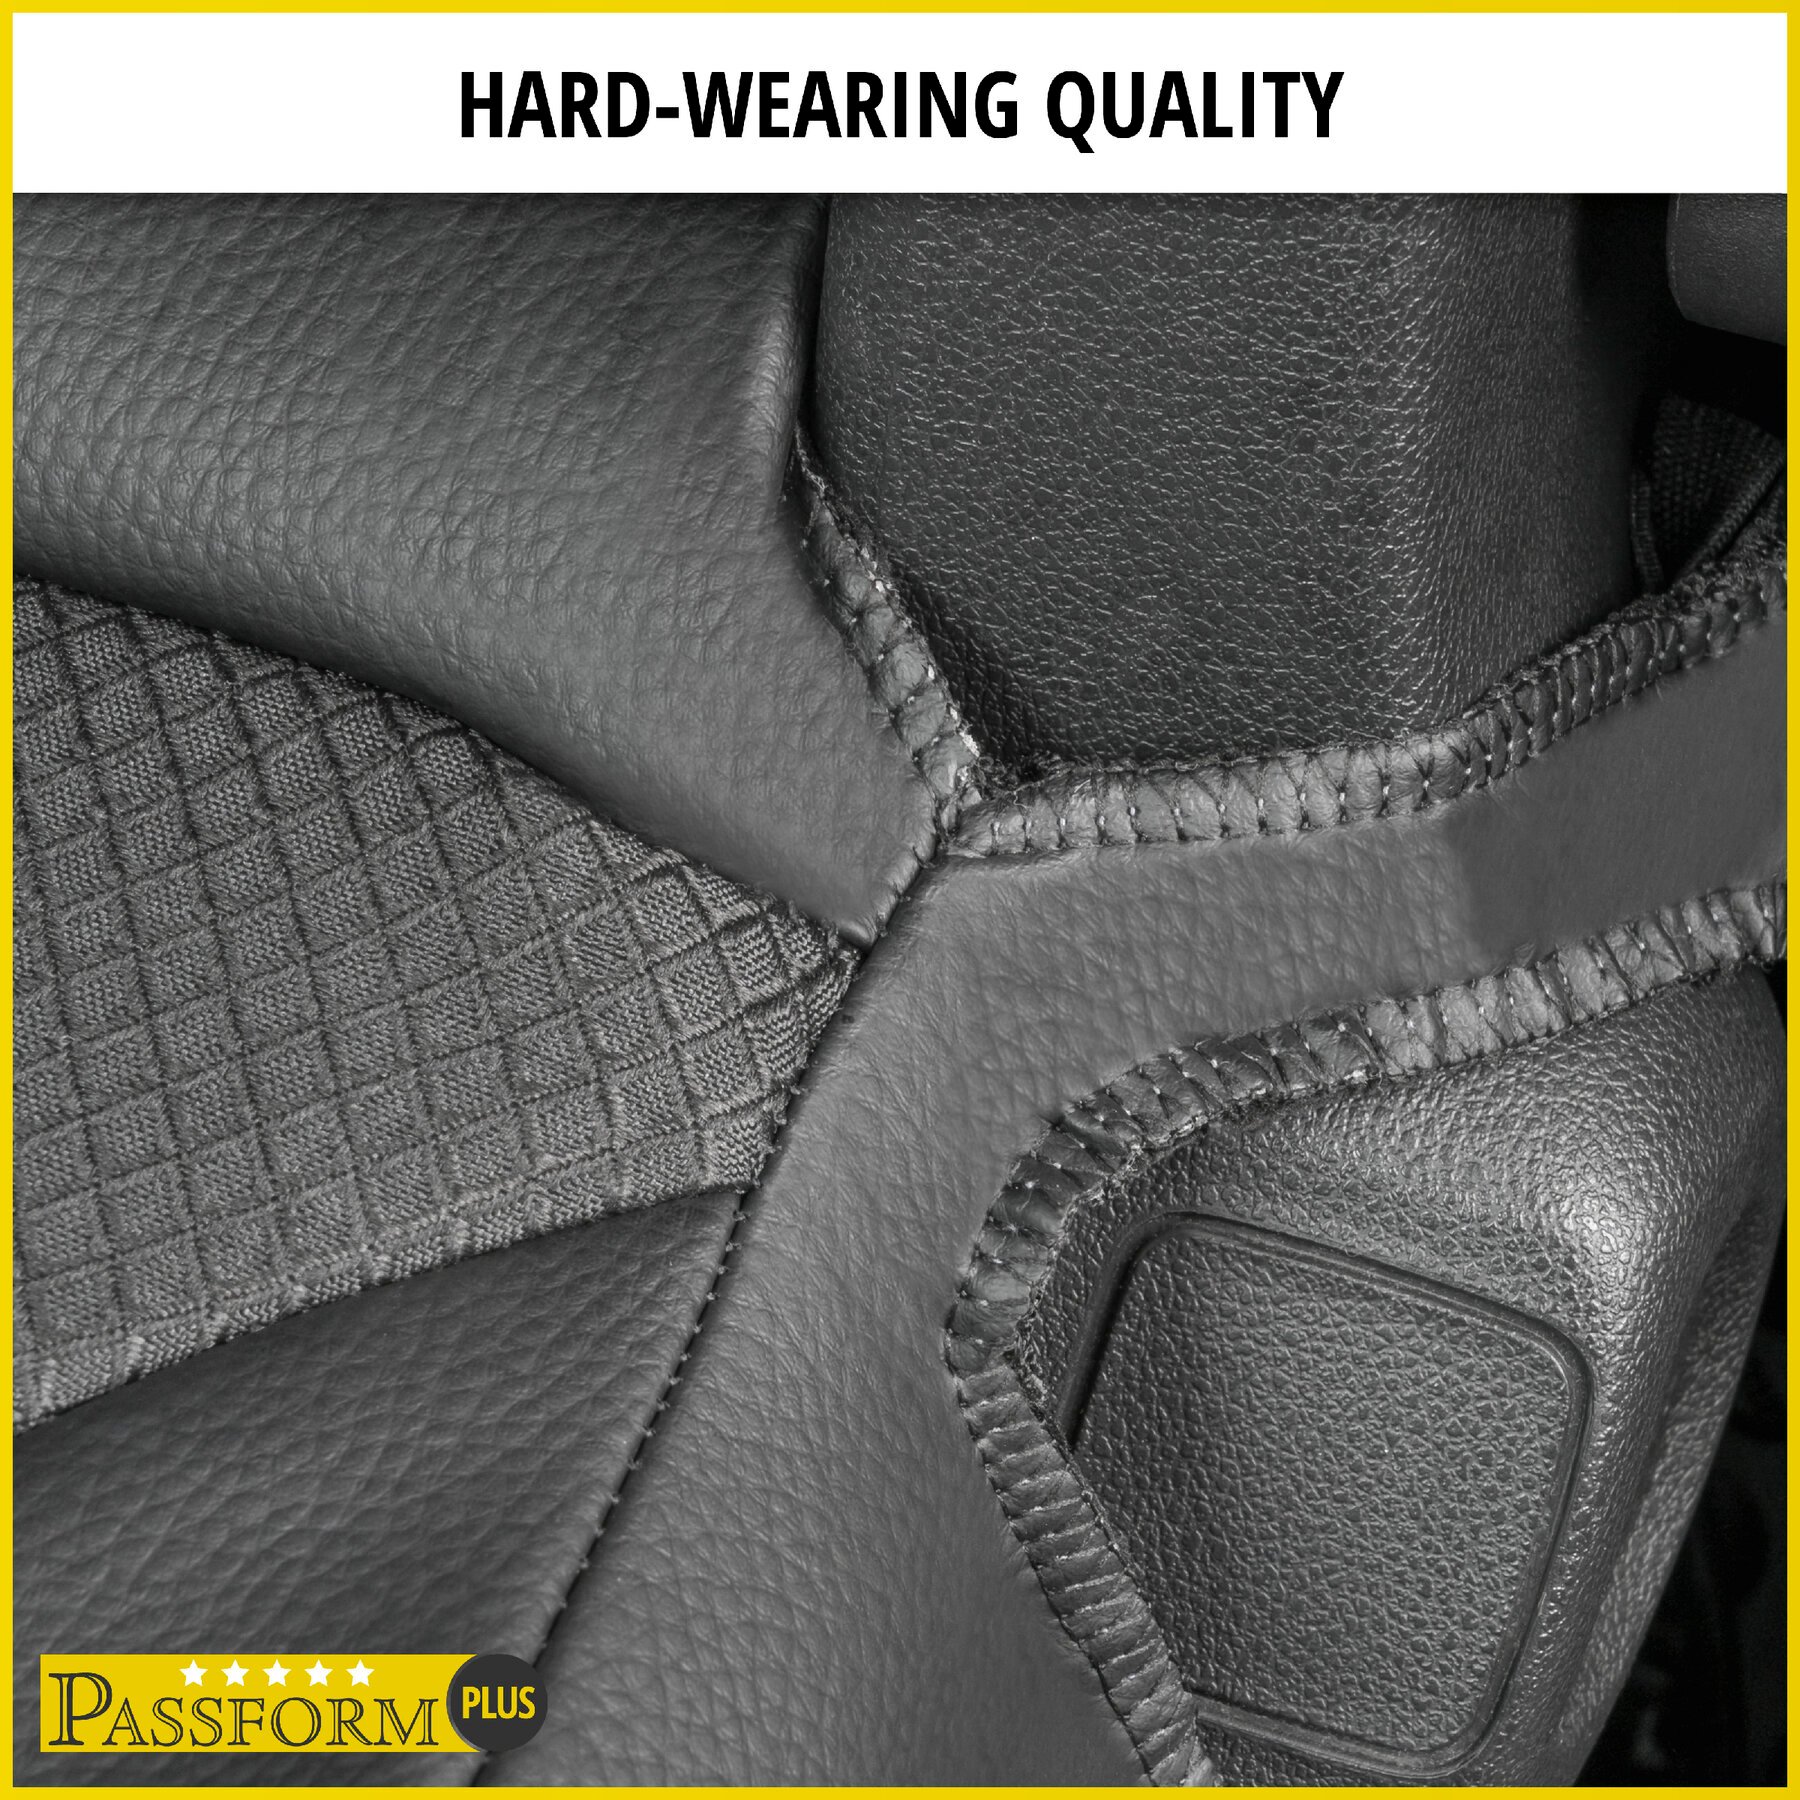 Premium Seat Cover for Ford Transit 2014-Today, 1 single seat cover front, 1 double bench cover